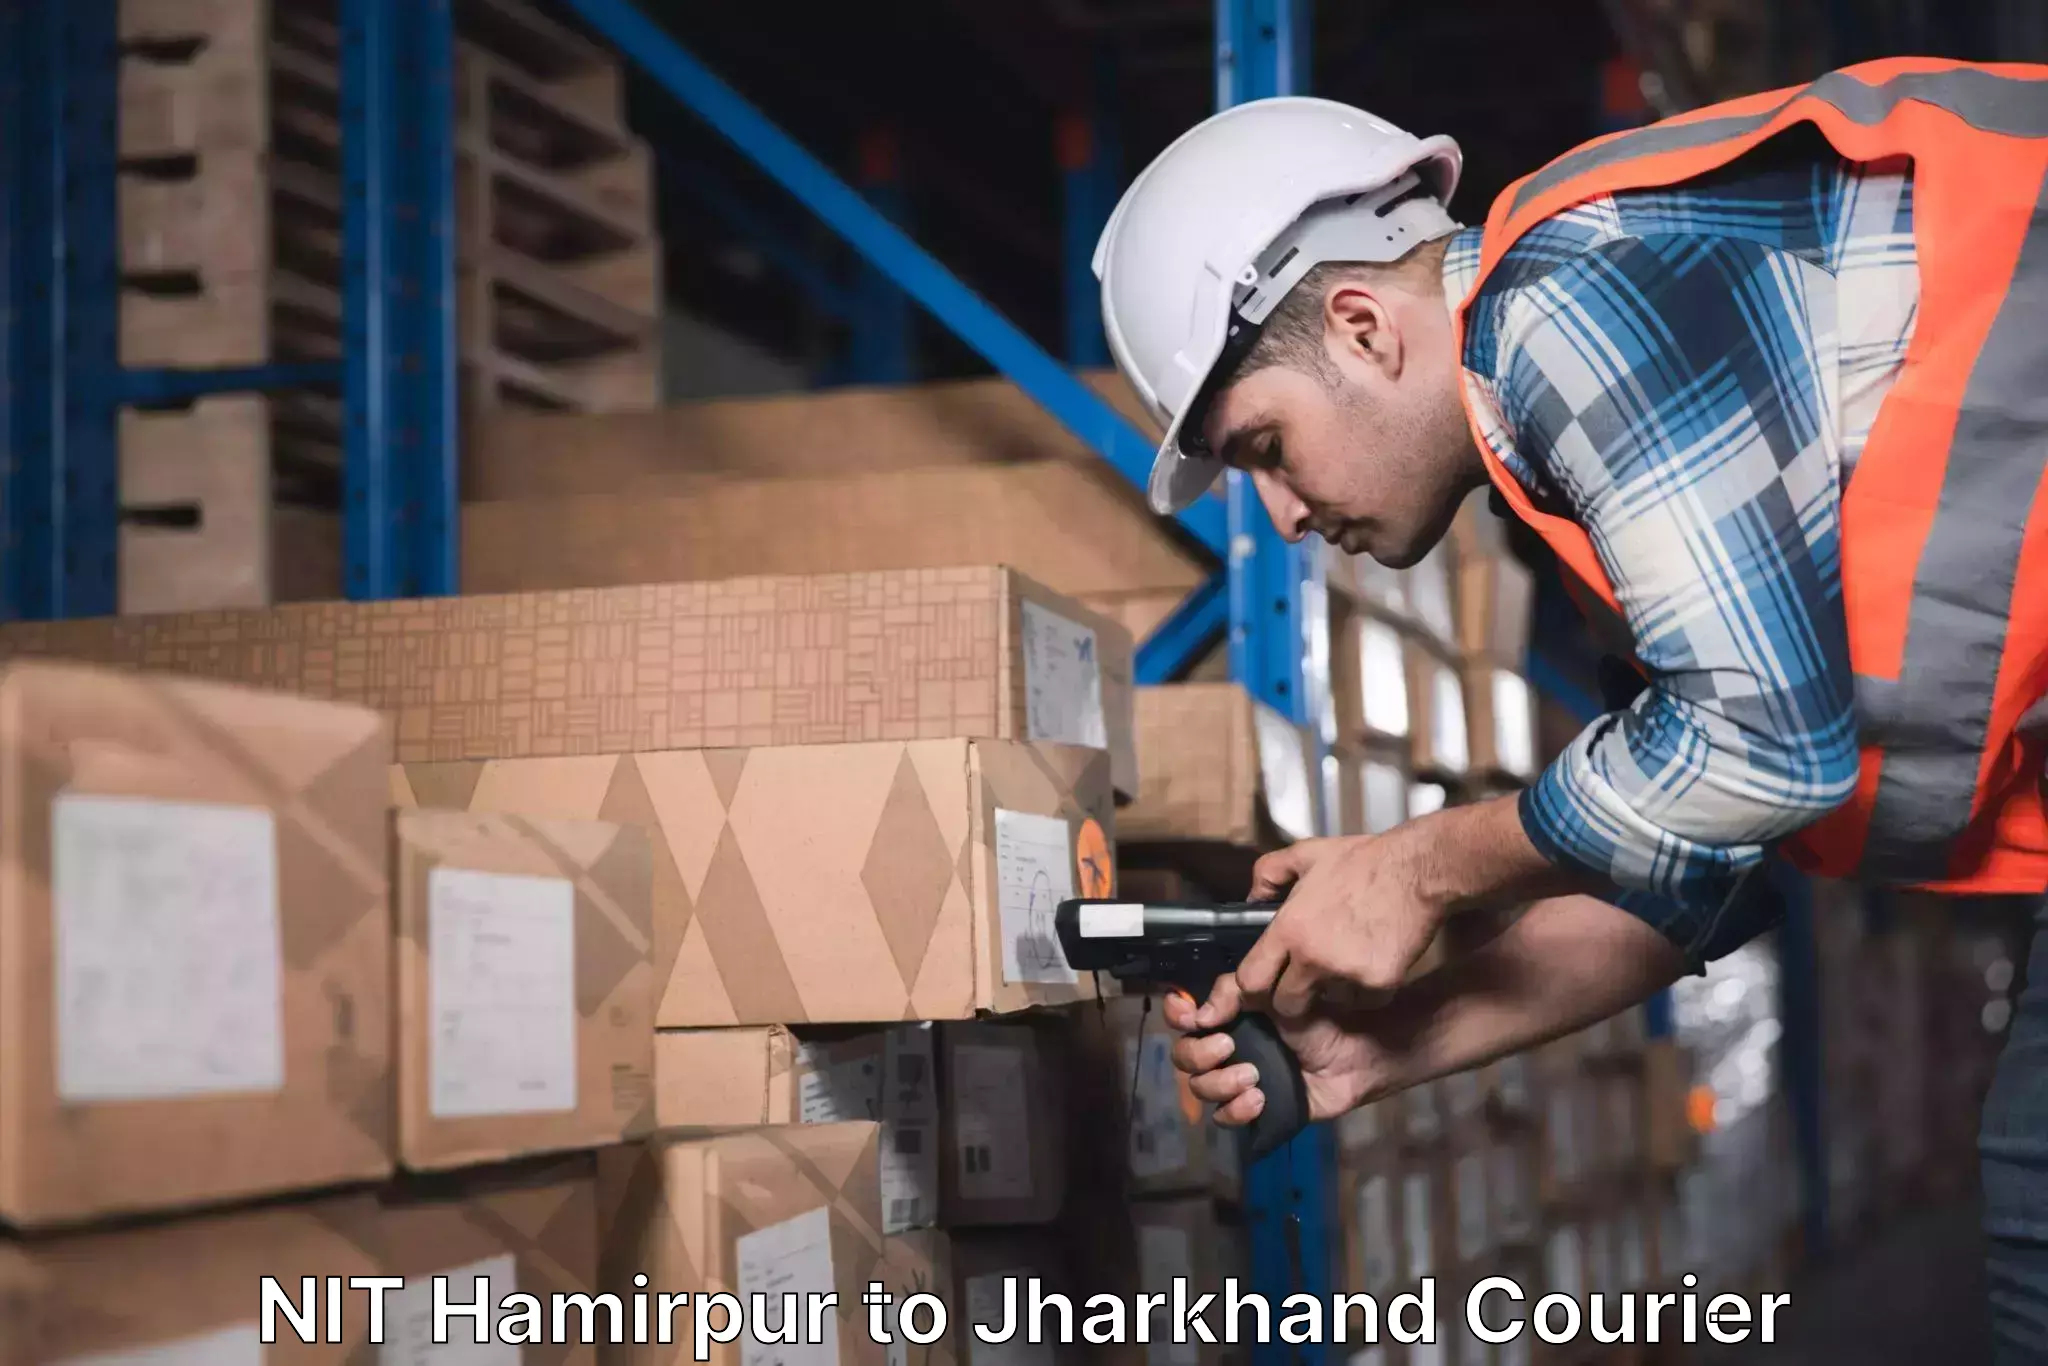 User-friendly courier app NIT Hamirpur to Dhanbad